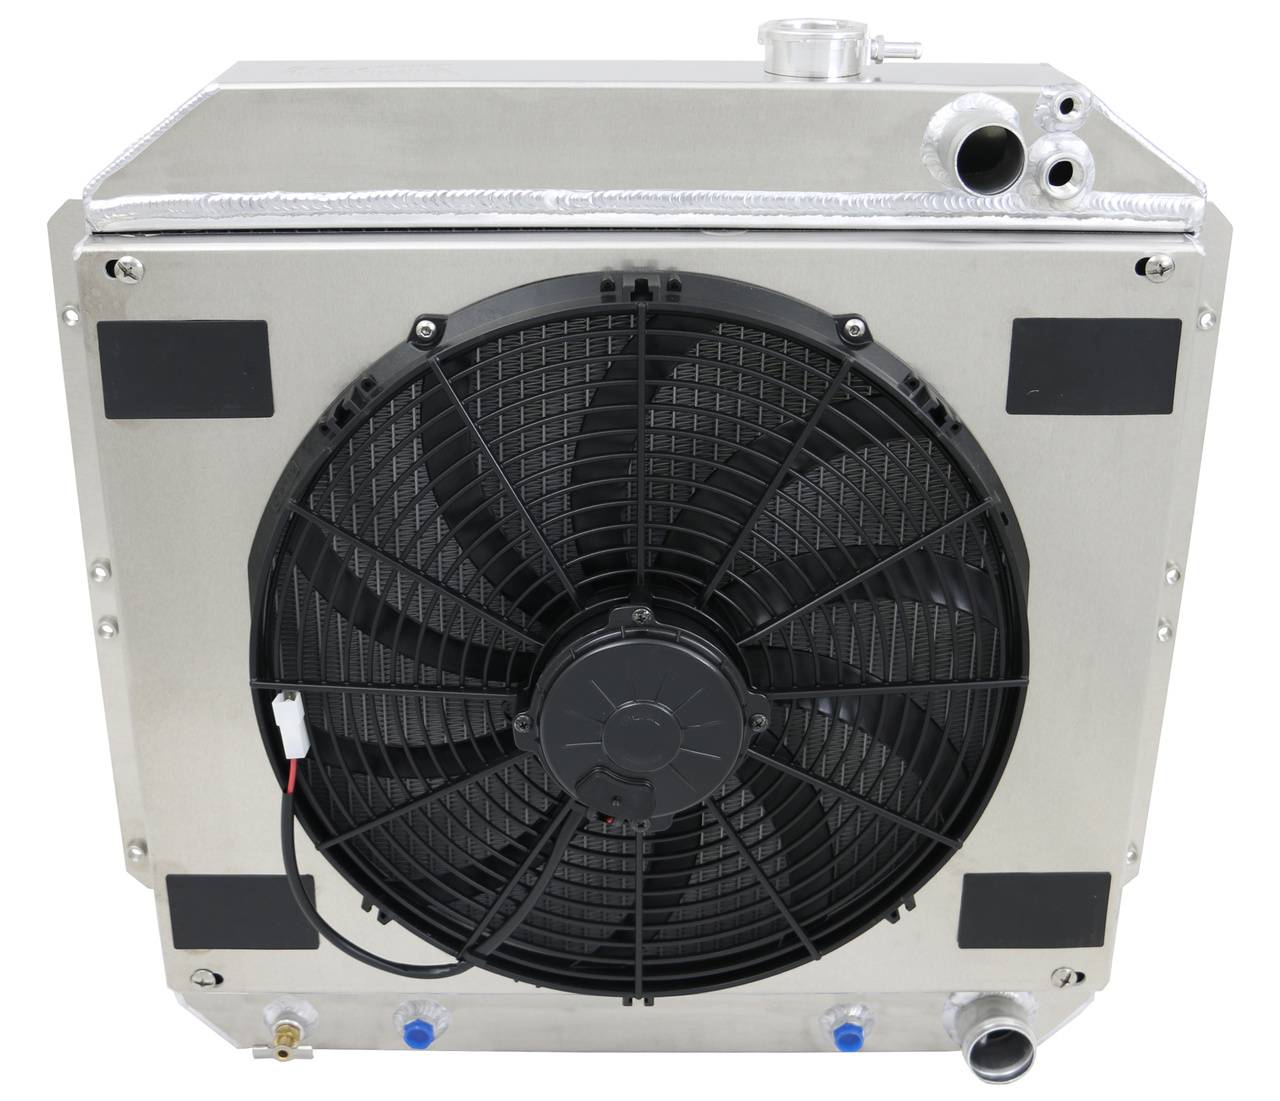 Wizard Cooling Inc - Wizard Cooling - 1949-1954 Chevrolet Bel Air/ Impala Aluminum Radiator With Fan - 10024-208LSMD